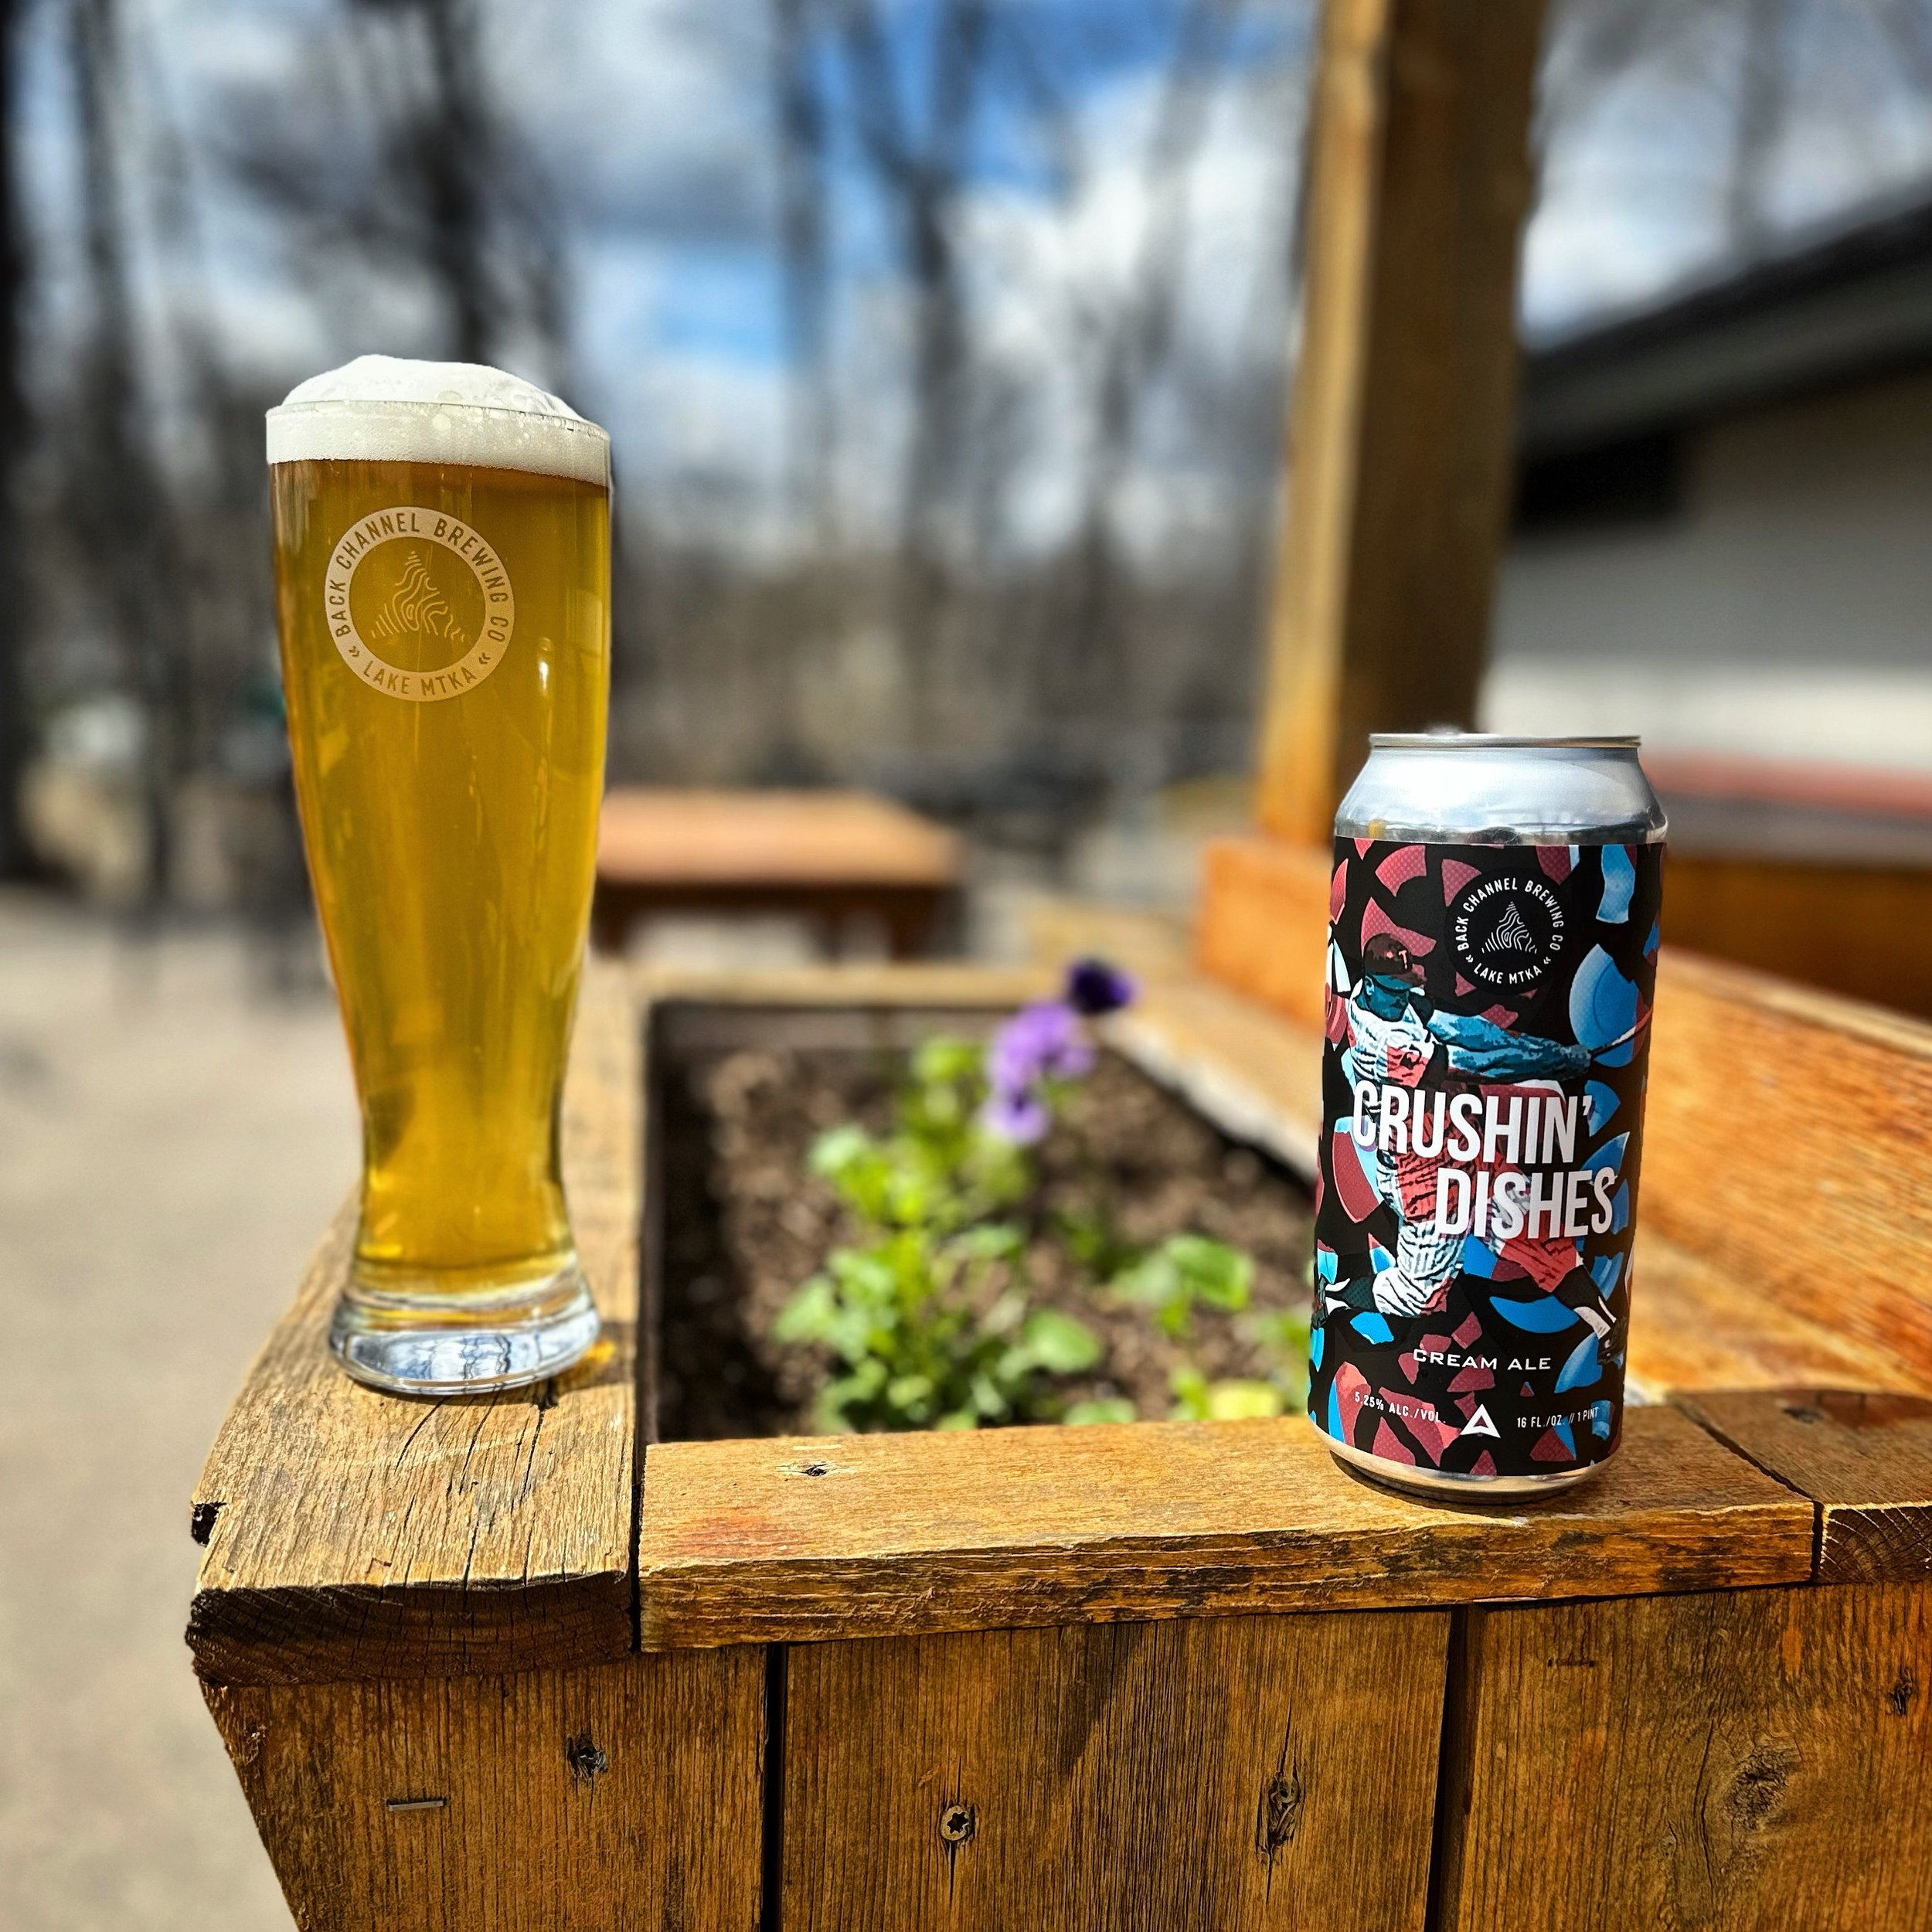 Our beloved Twinkies could use a boost, so we&rsquo;re calling up the killer.

Crushin&rsquo; Dishes - Cream Ale (5.25%)

Sweet // Corn // Floral

On tap and available in 4pks!